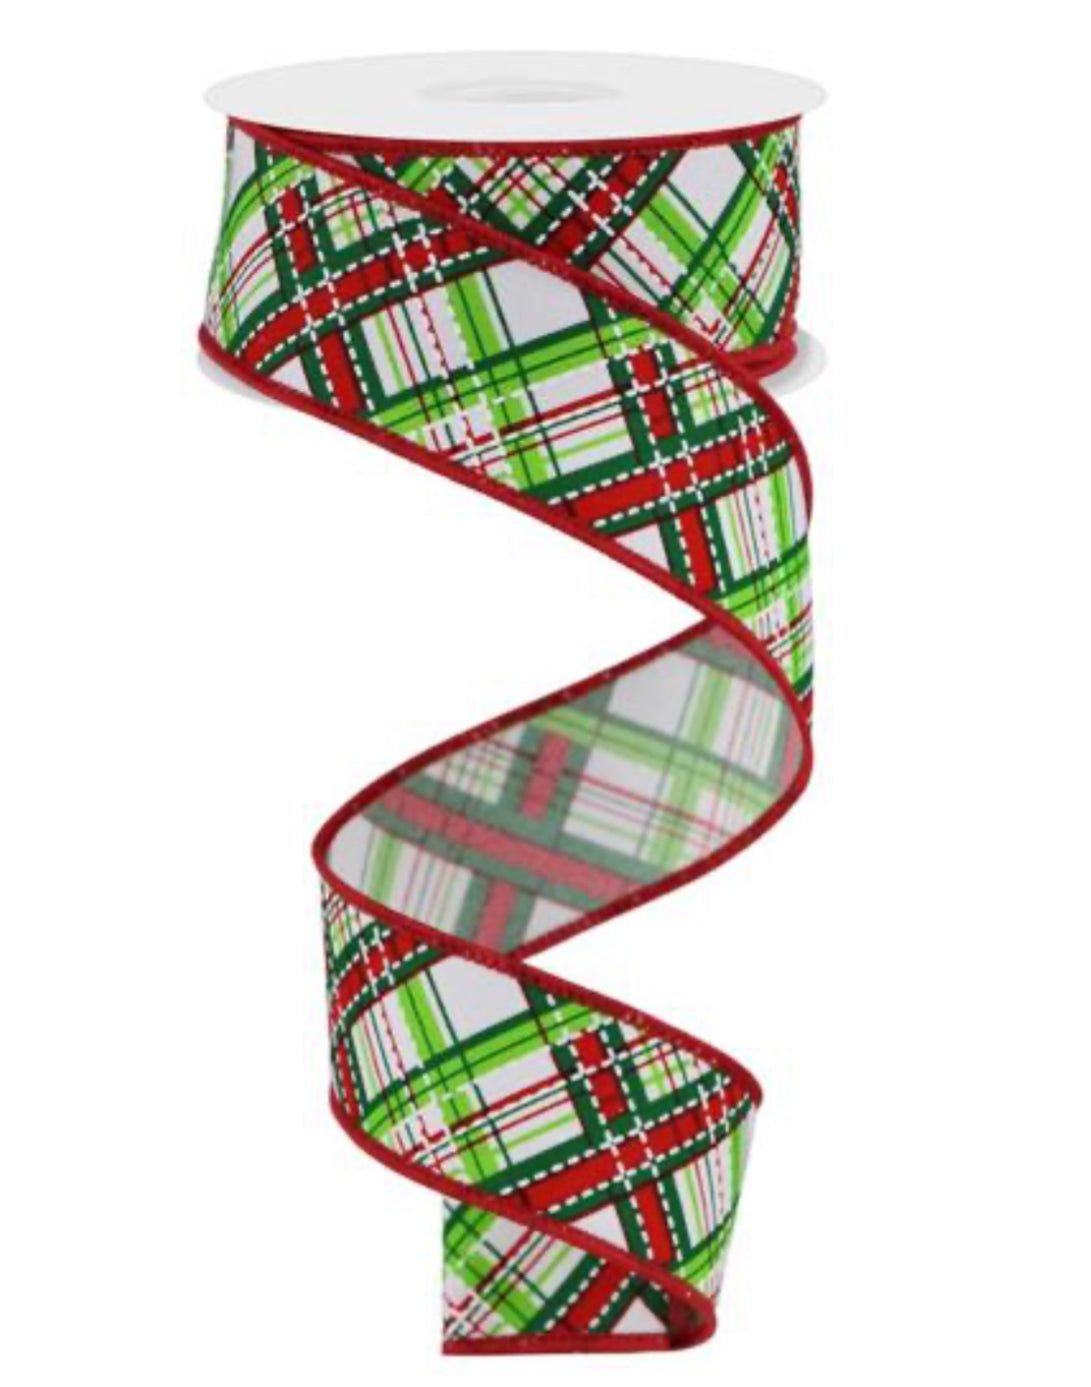 1.5 Wired Christmas Plaid Ribbon - Red, Green, Black & Gold Canvas Pl –  Perpetual Ribbons